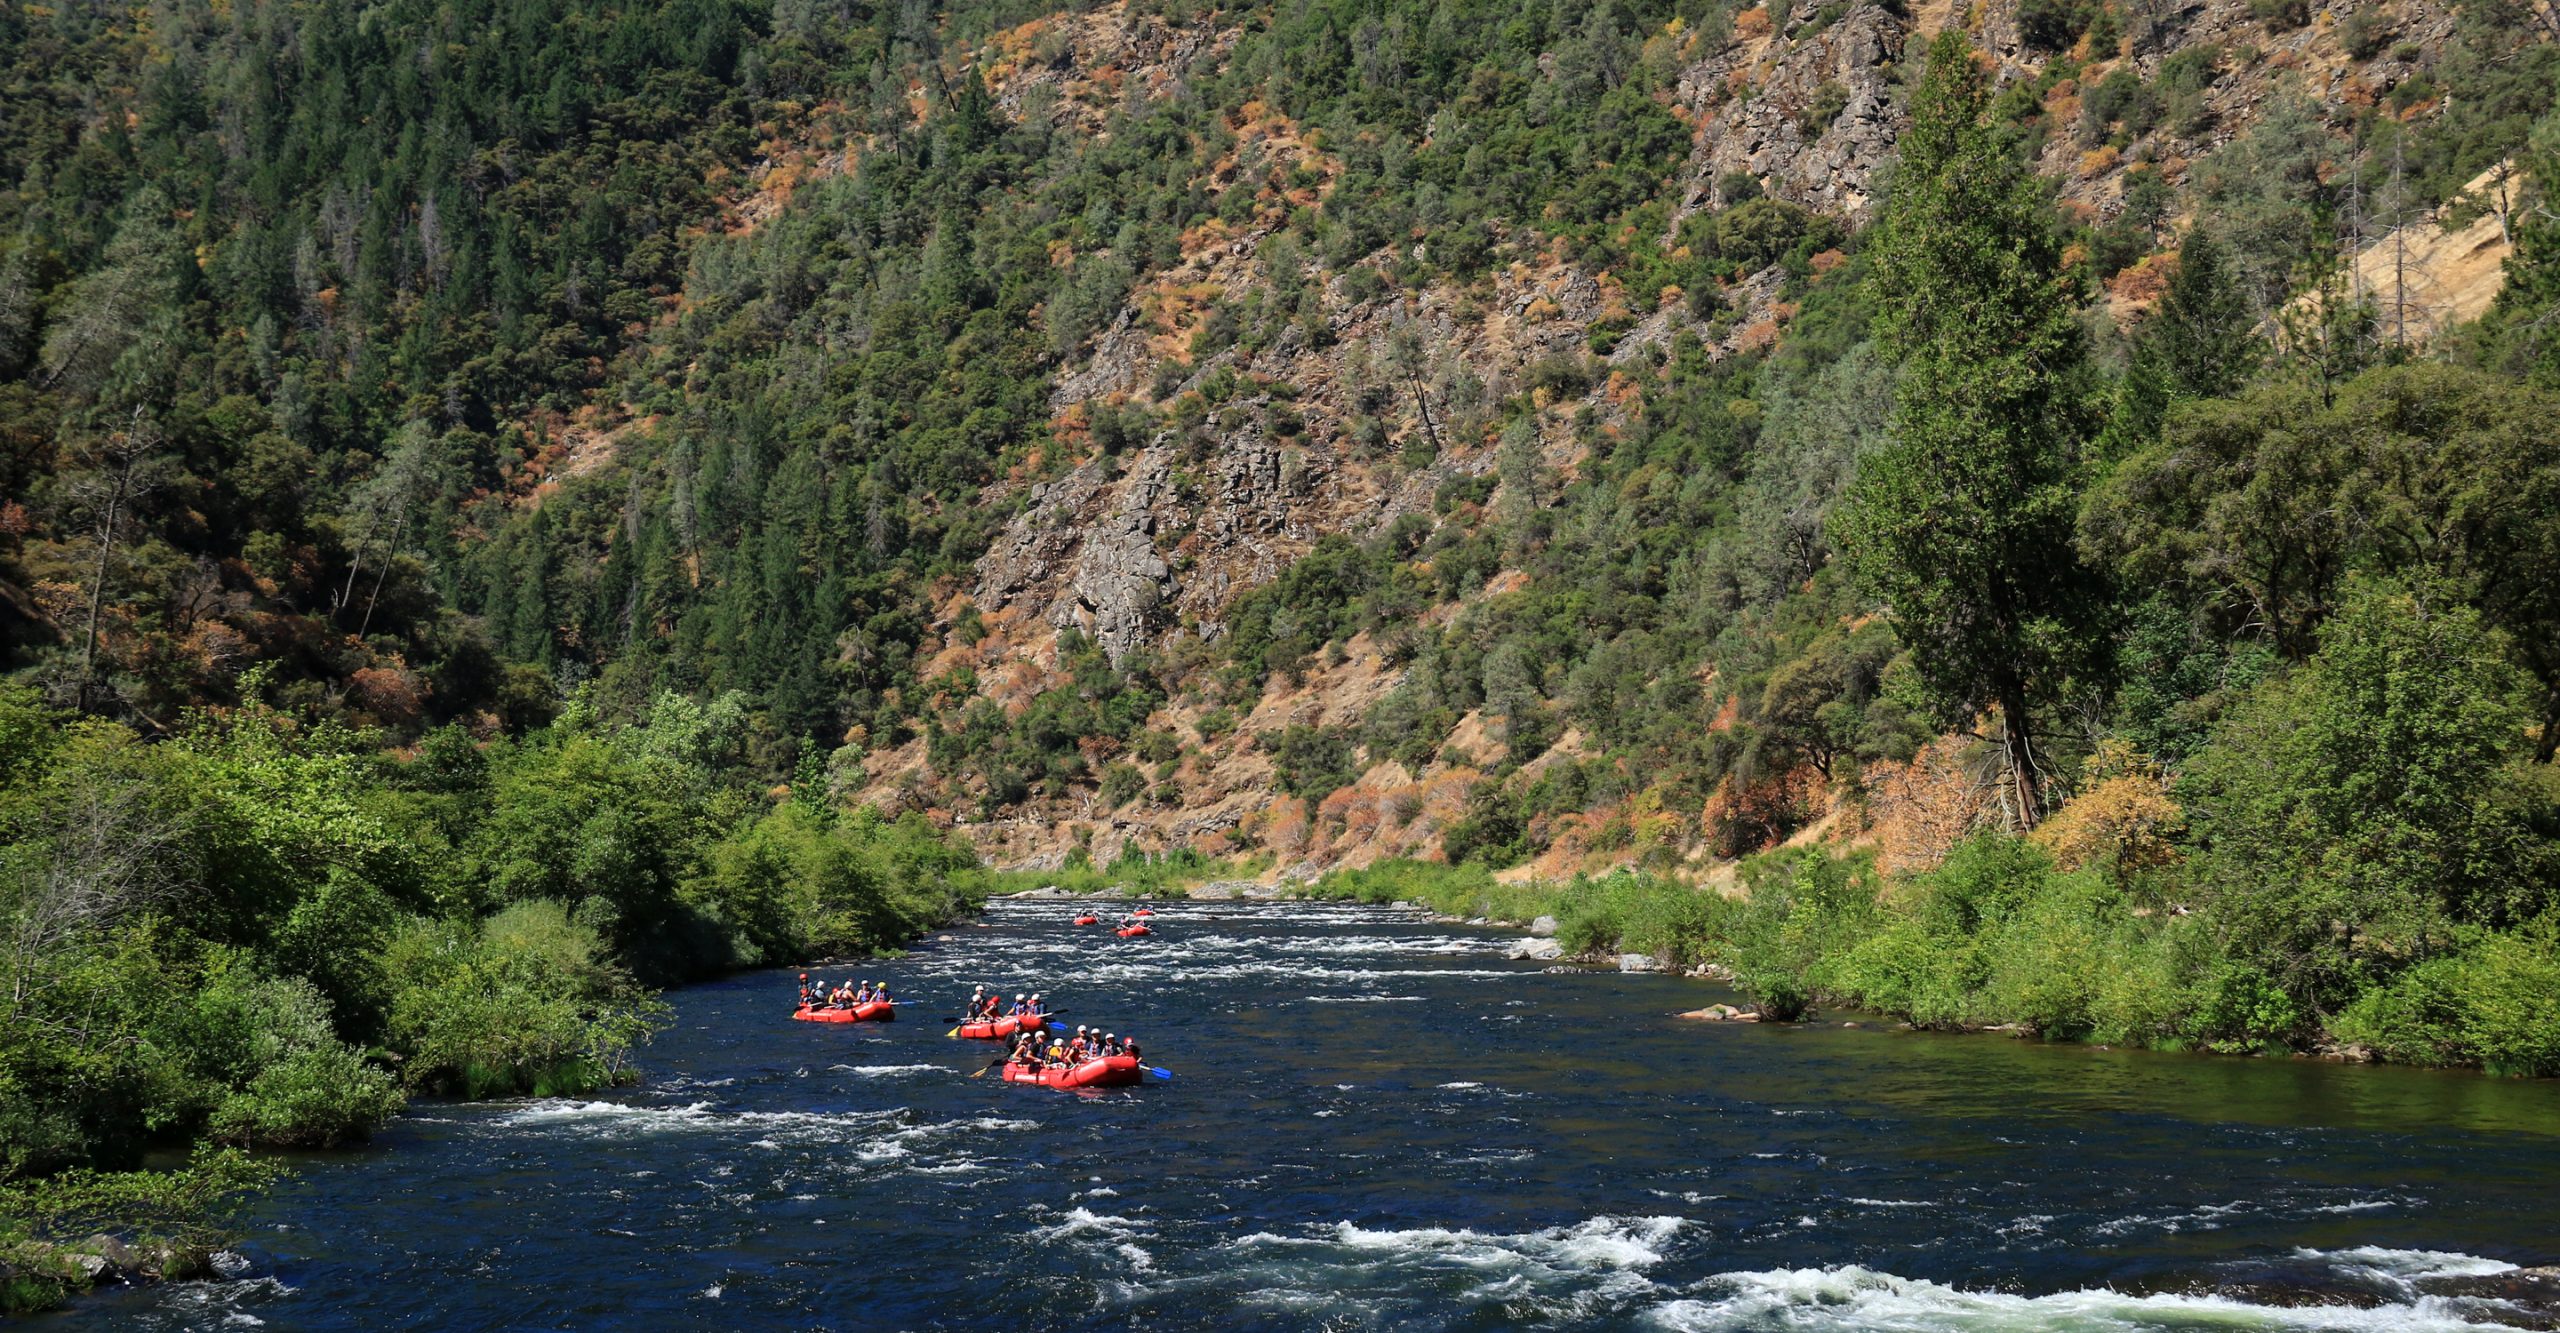 Home My Rafting Photos American River Rafting Photography